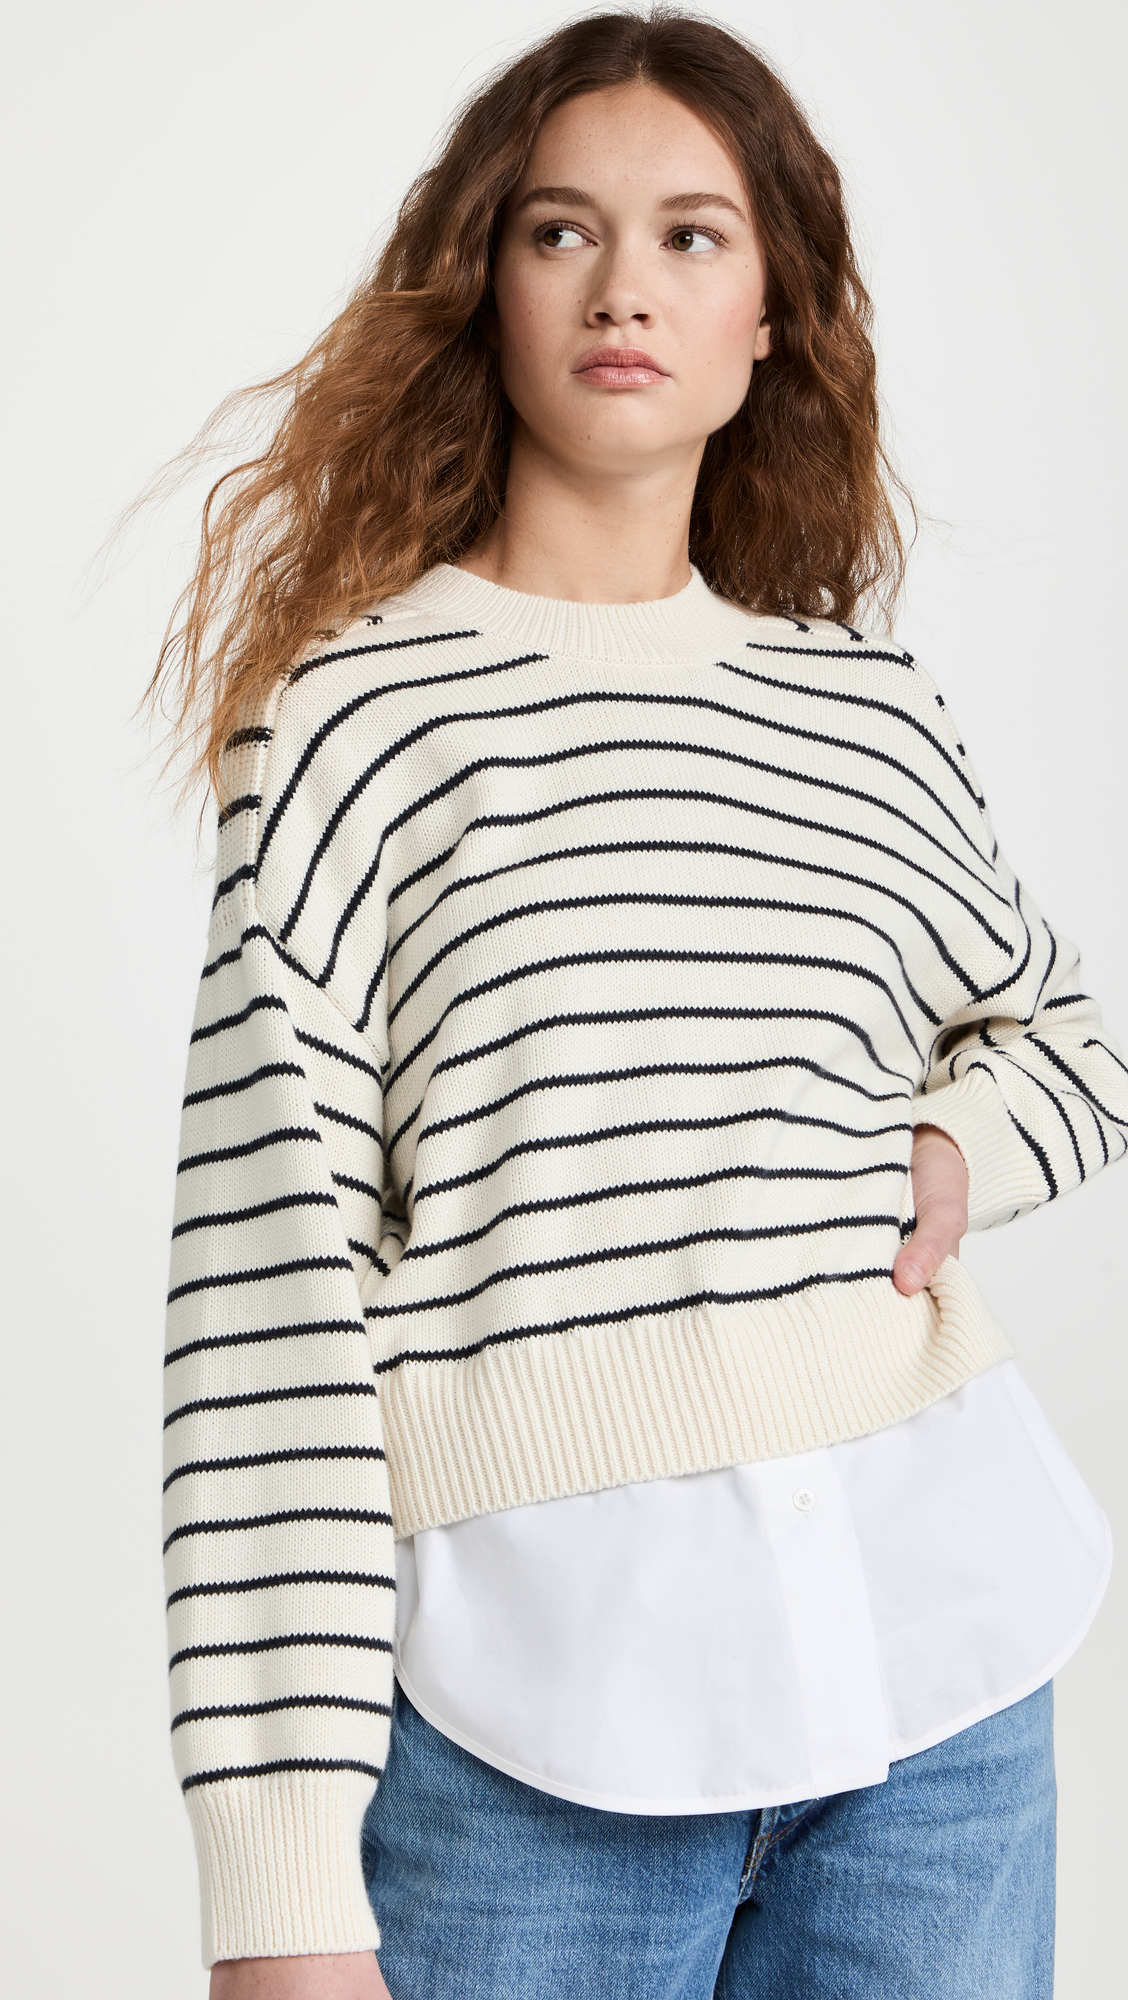 The Best Striped Sweaters Fashion People Are Wearing Now | Who What Wear